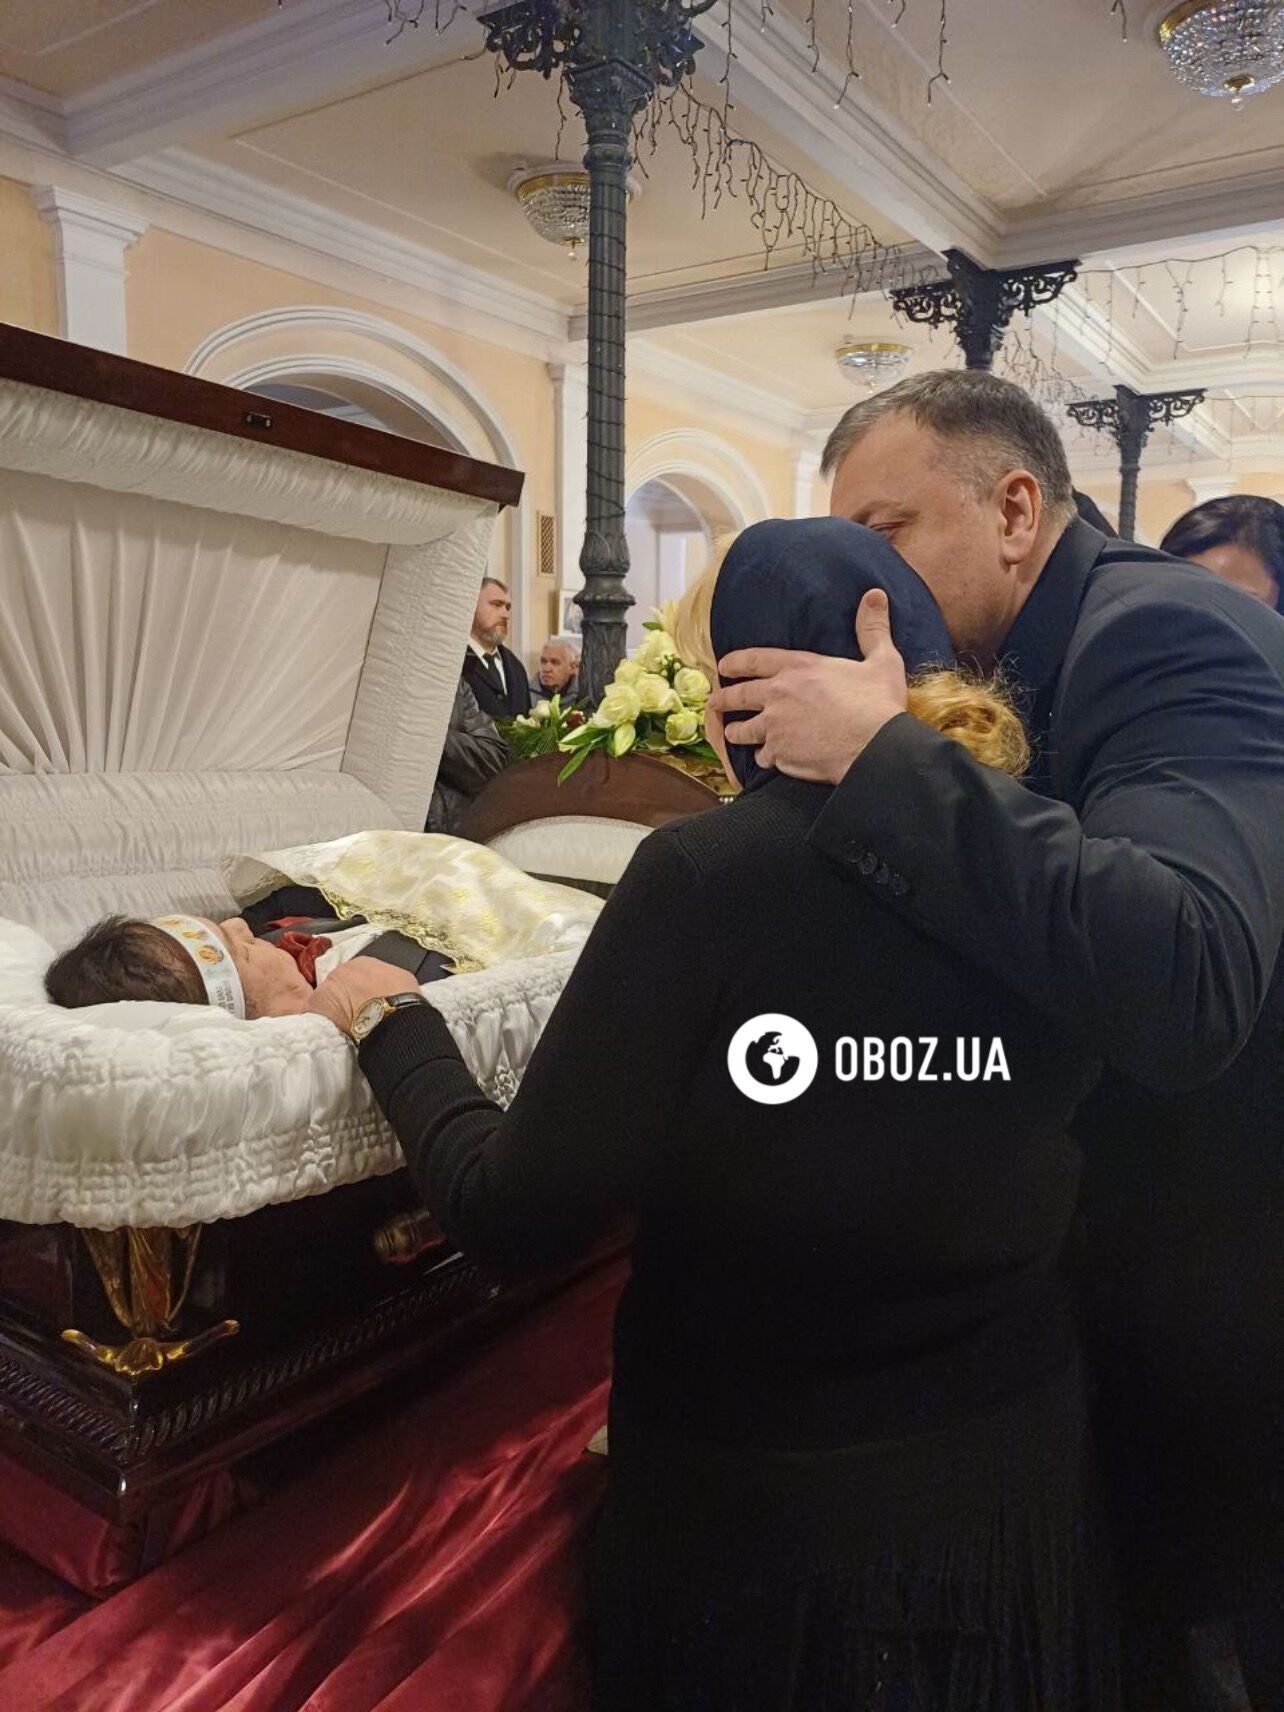 The melody of two hearts: Svetlana Belonozhko tenderly bid farewell to her beloved husband, with whom she lived together for 47 years